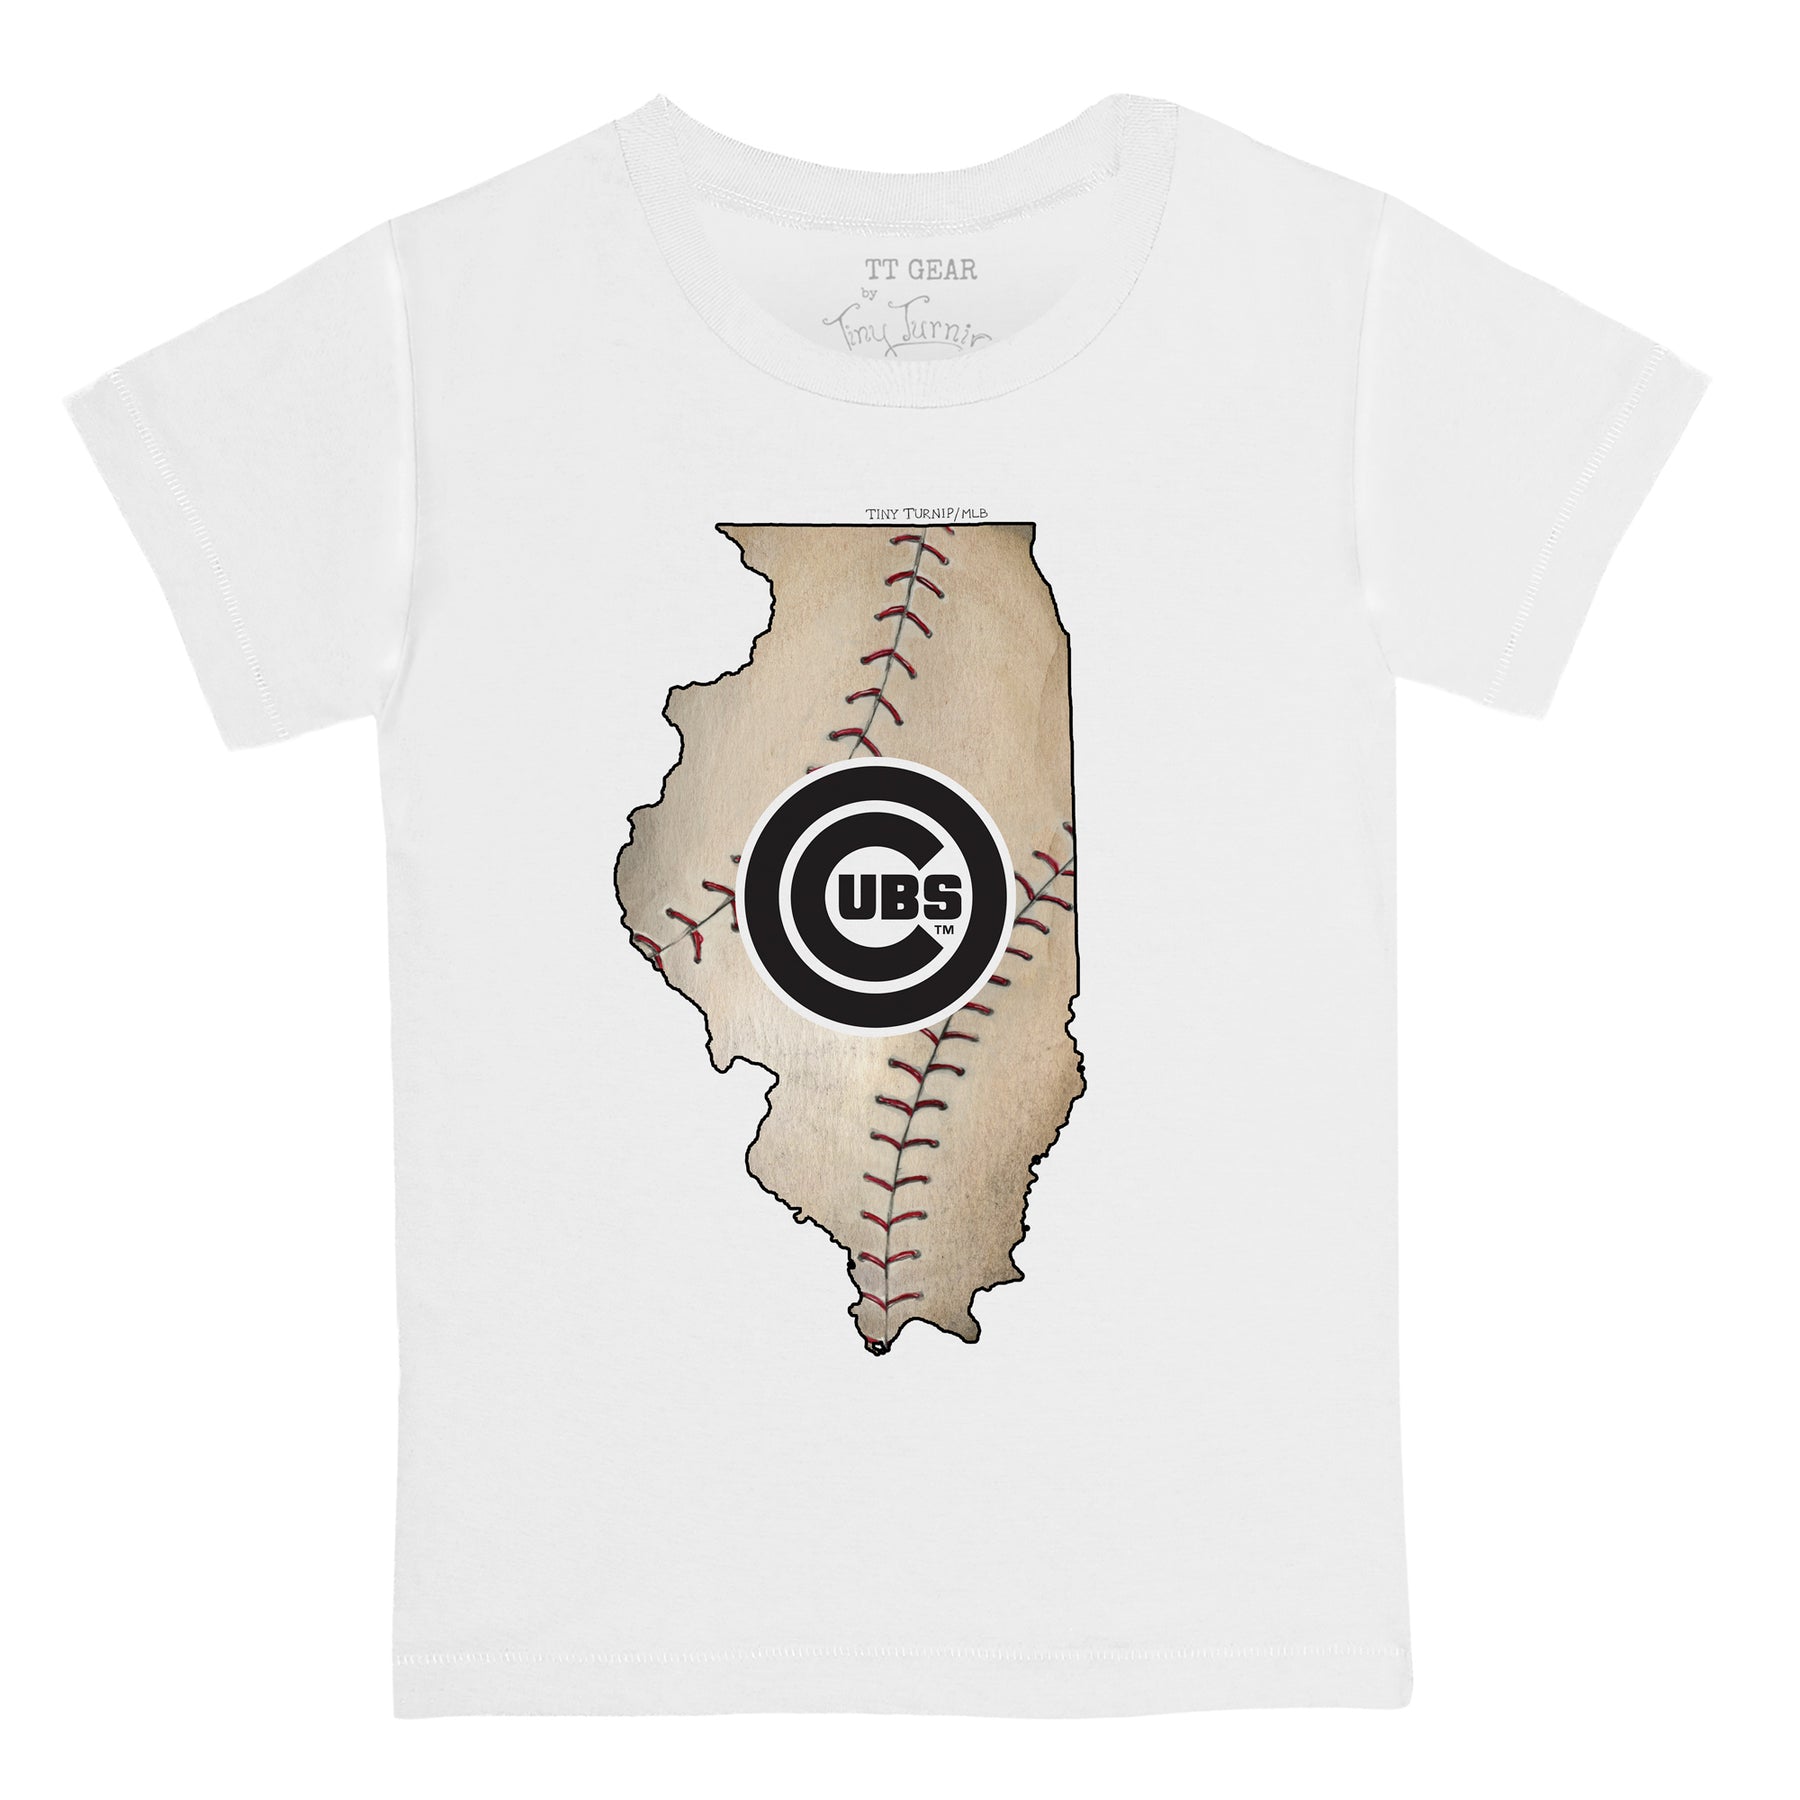 Youth Tiny Turnip White Chicago Cubs Triple Scoop T-Shirt Size: Extra Large